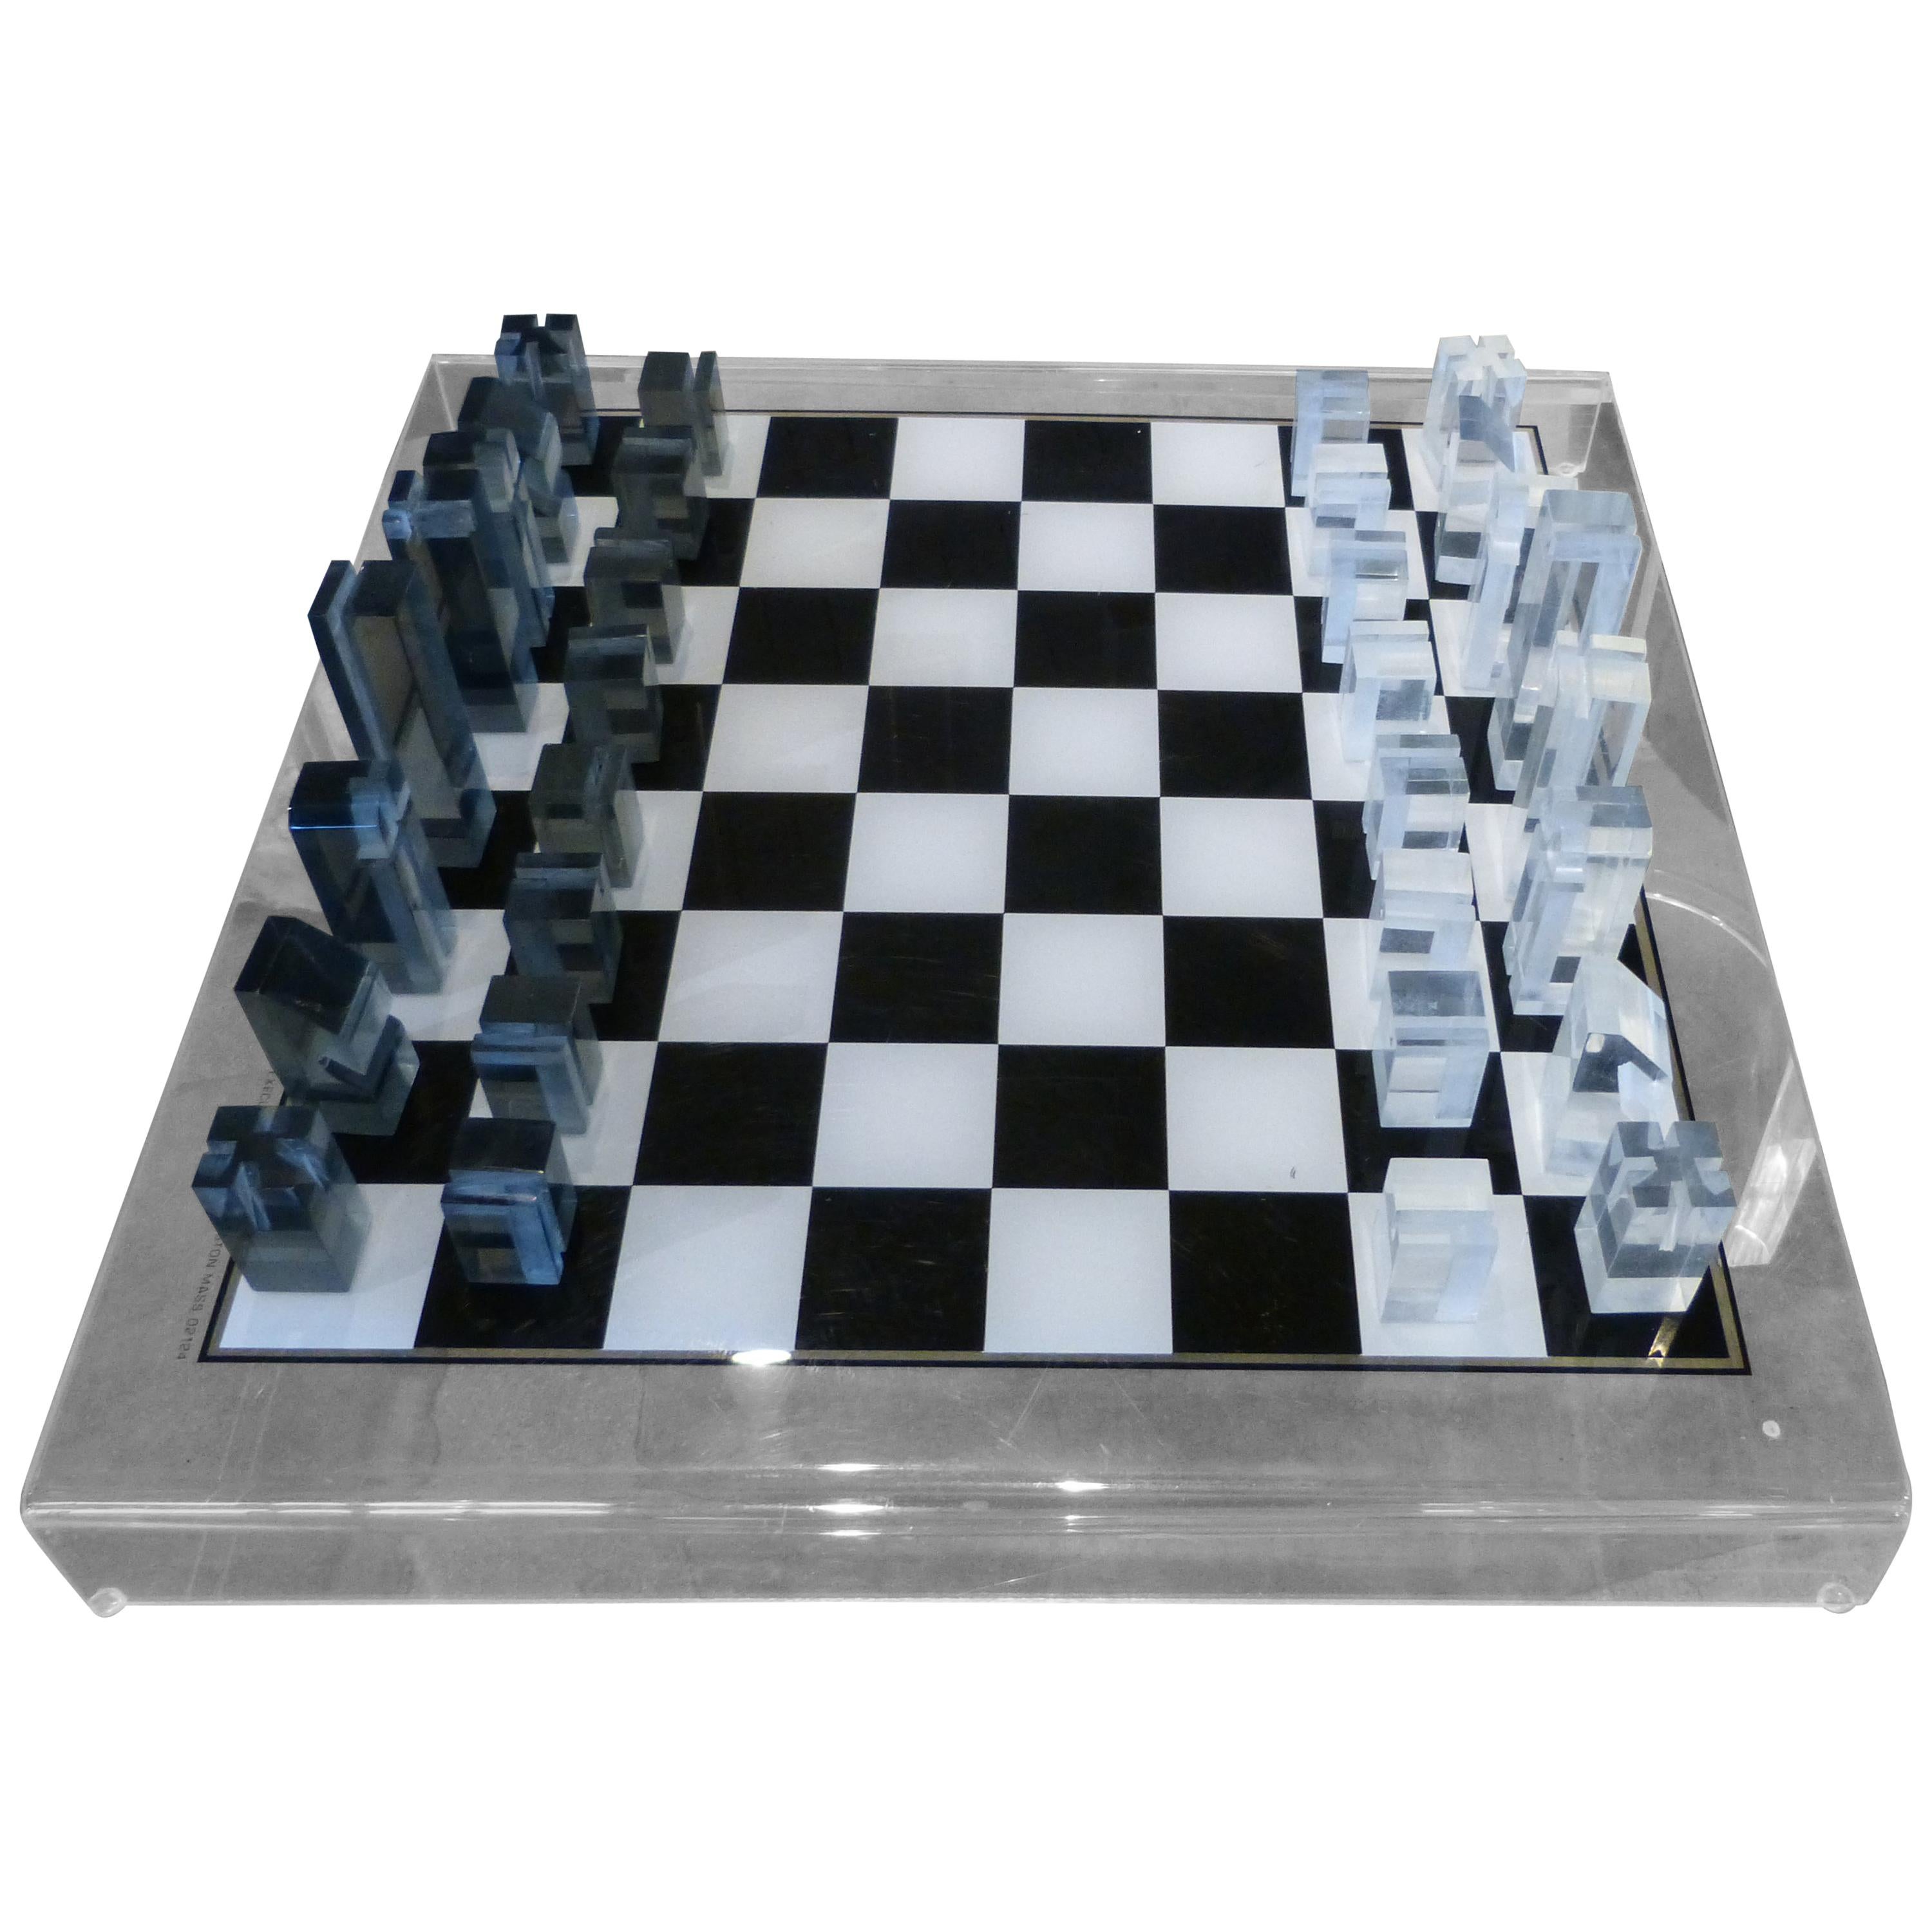 1973 Executive Games Acrylic Chess Set with Board